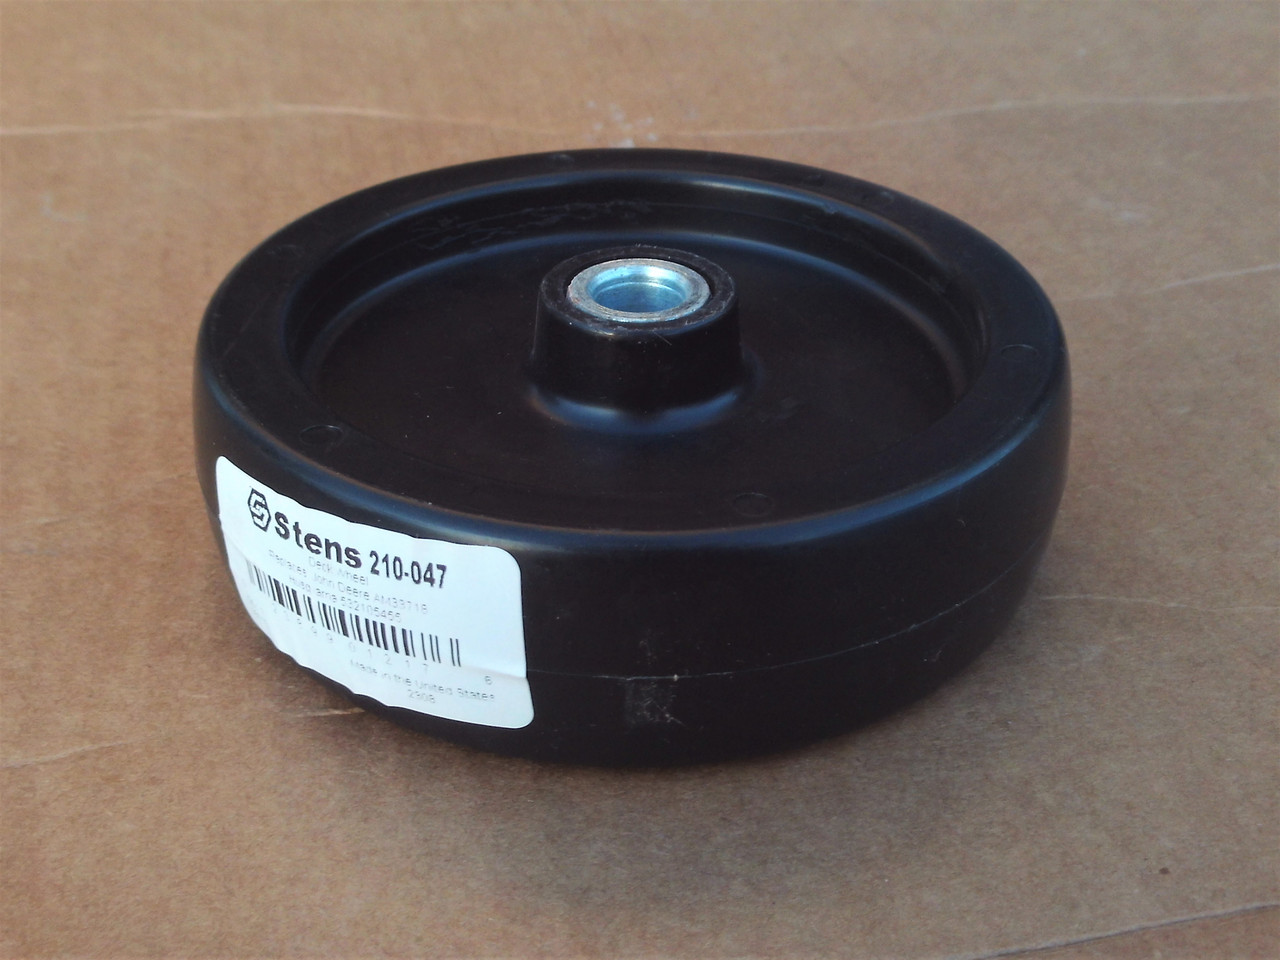 Deck Wheel for Toro 36", 42", 46" Cut 619760, 61-9760 Made In USA, Wheel Size: 5" tall x 1-3/8" wide, Center hole: 1/2"